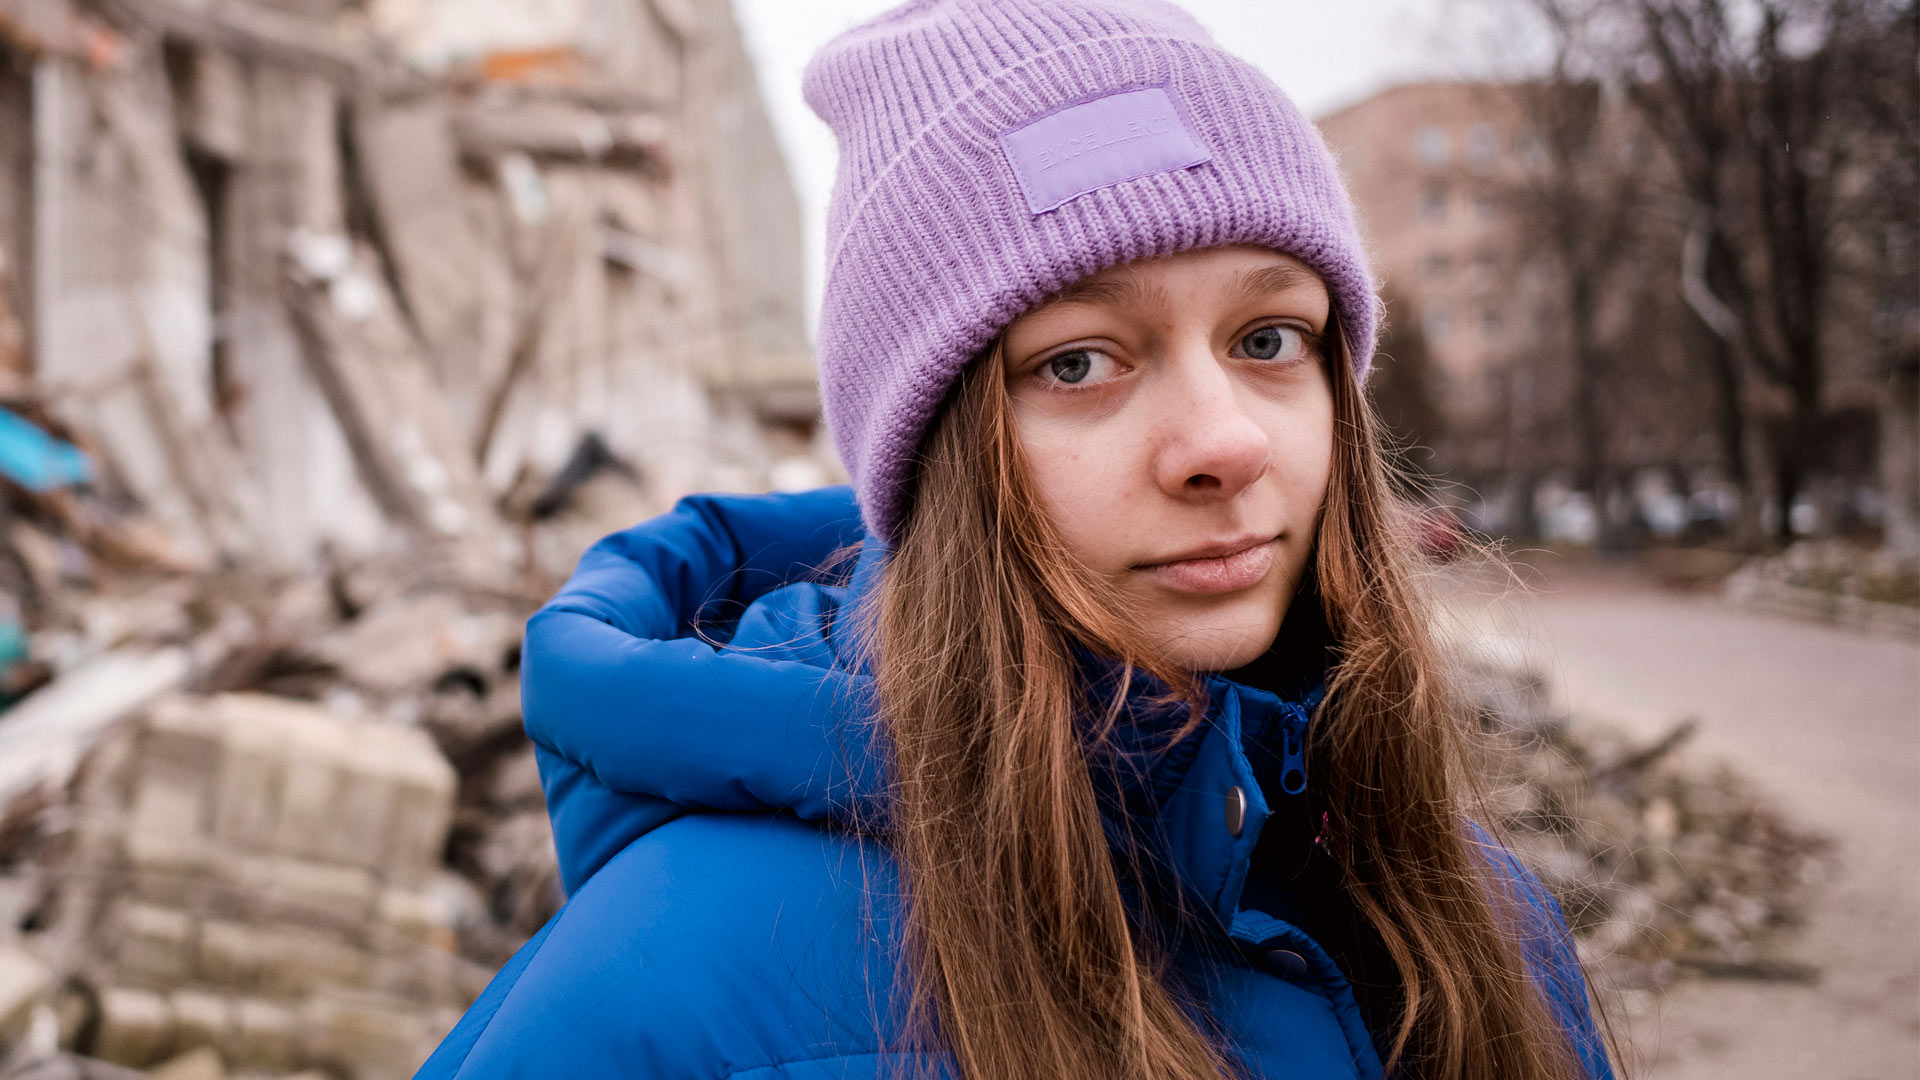 Kateryna Tkachenko, 9th grader at Lyceum Number 25 in Zhytomyr, Ukraine looks at the camera standing in front of the destroyed school.